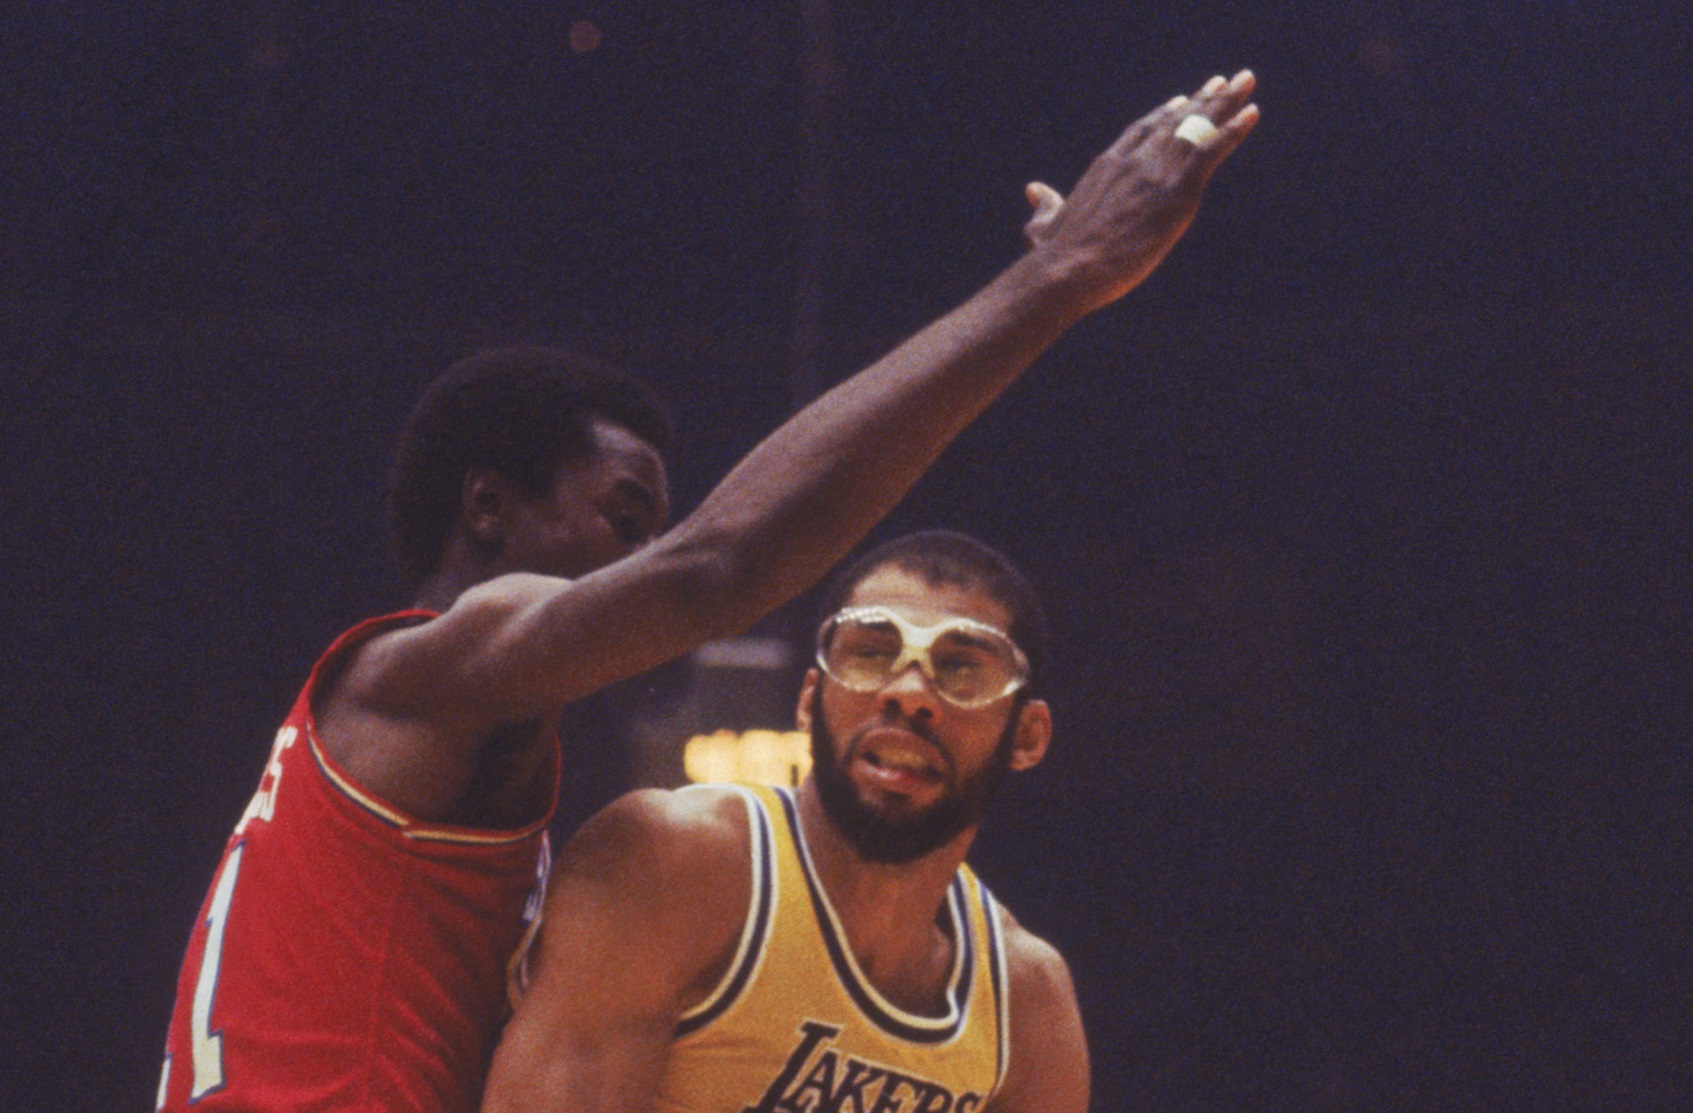 Kareem Abdul-Jabbar's goggles were a trademark of his Hall of Fame career in the NBA. | Focus on Sport via Getty Images